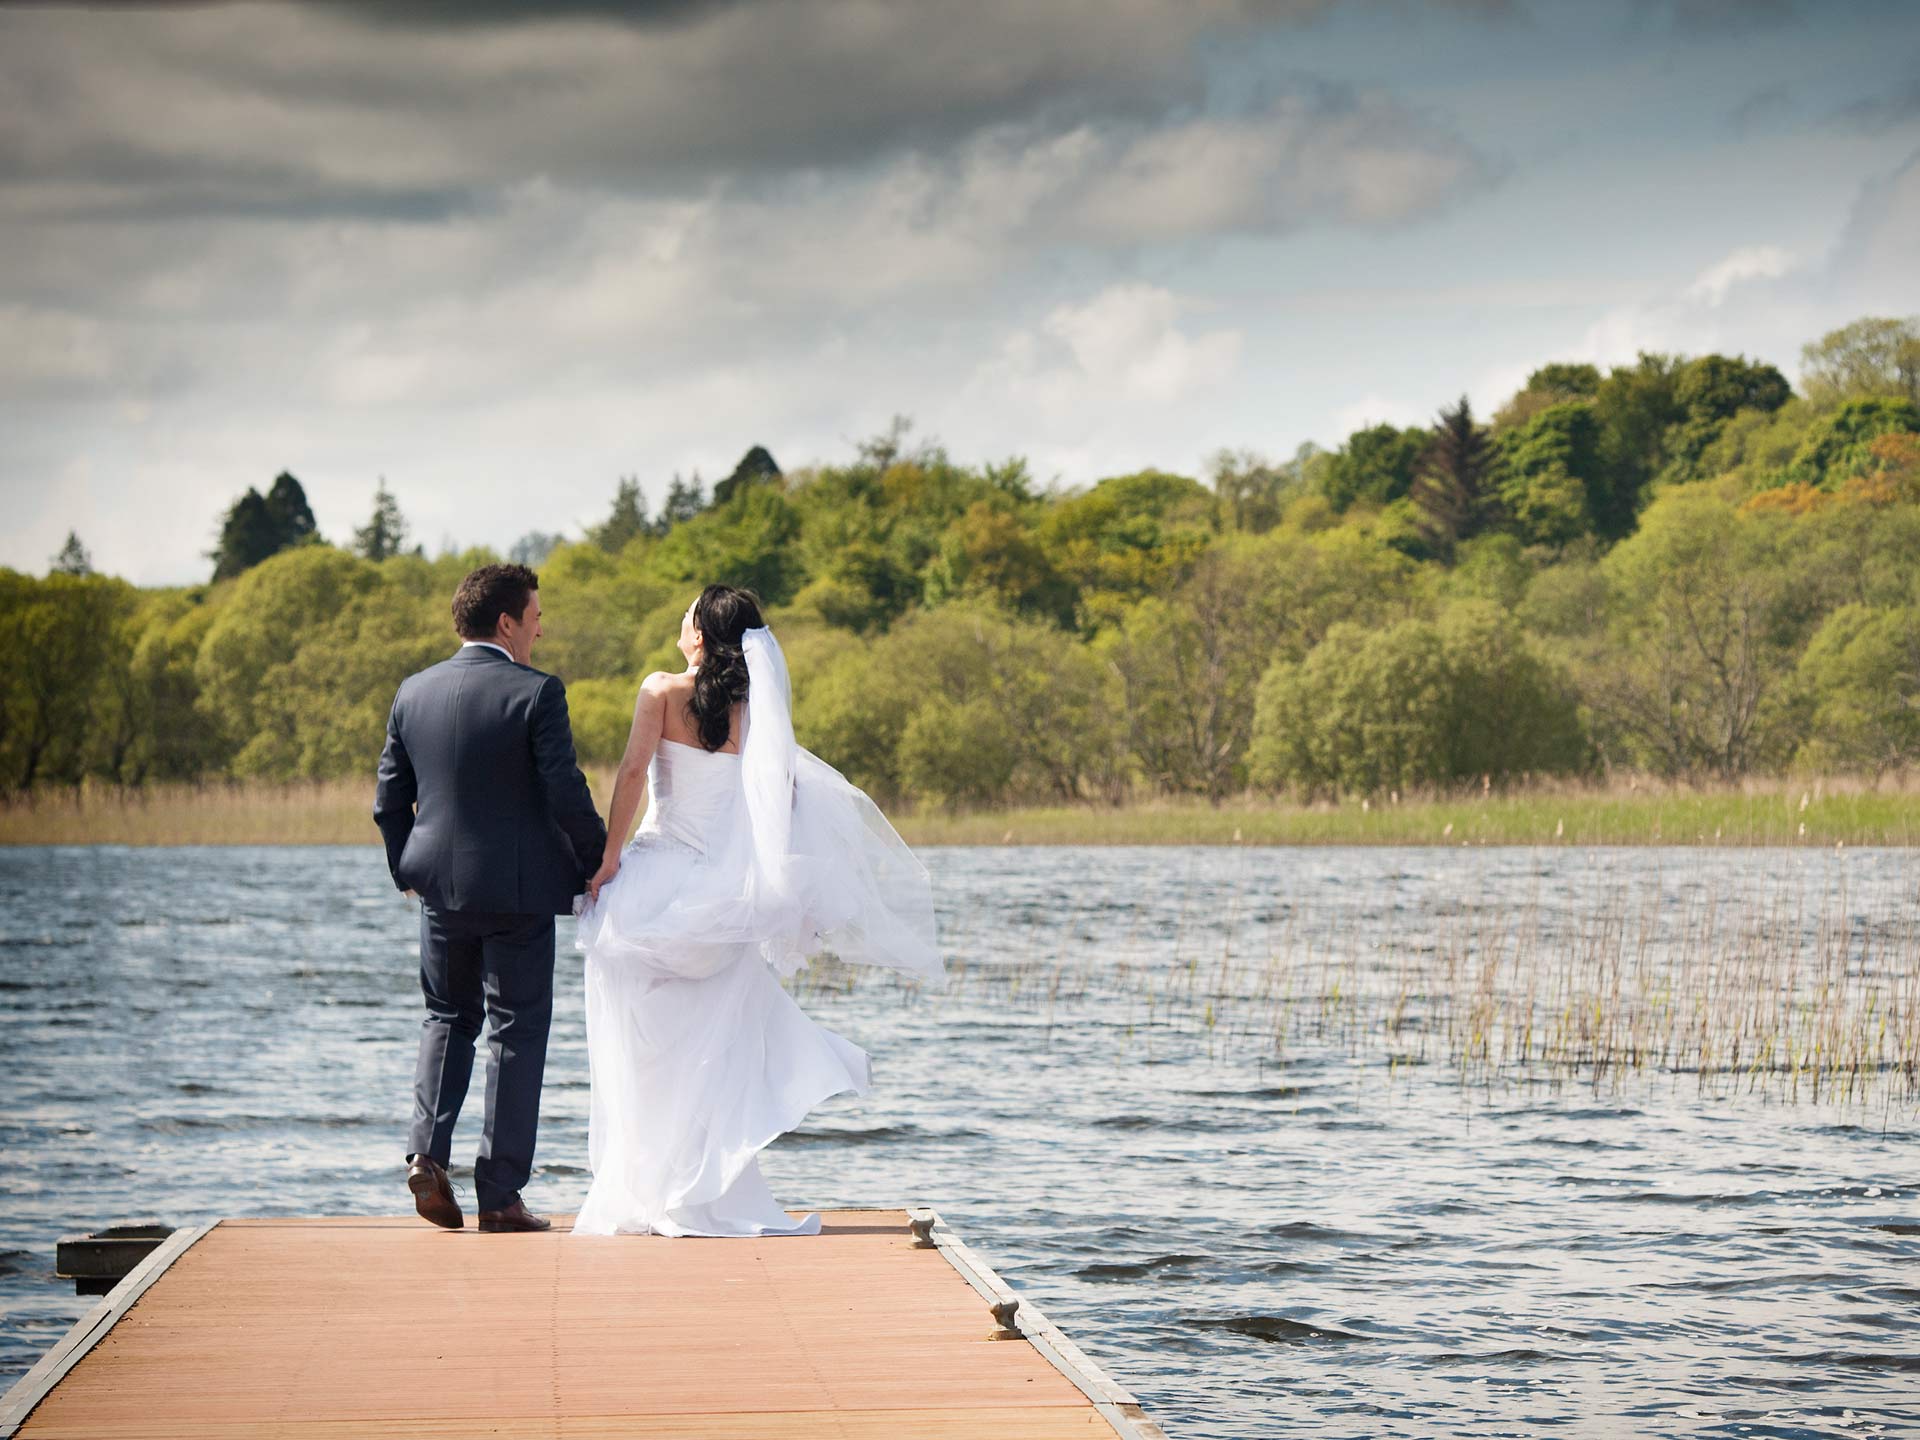 Bride and groom on pier. Image used in the Outdoor Wedding Venues In Ireland for Spring / Summer article.